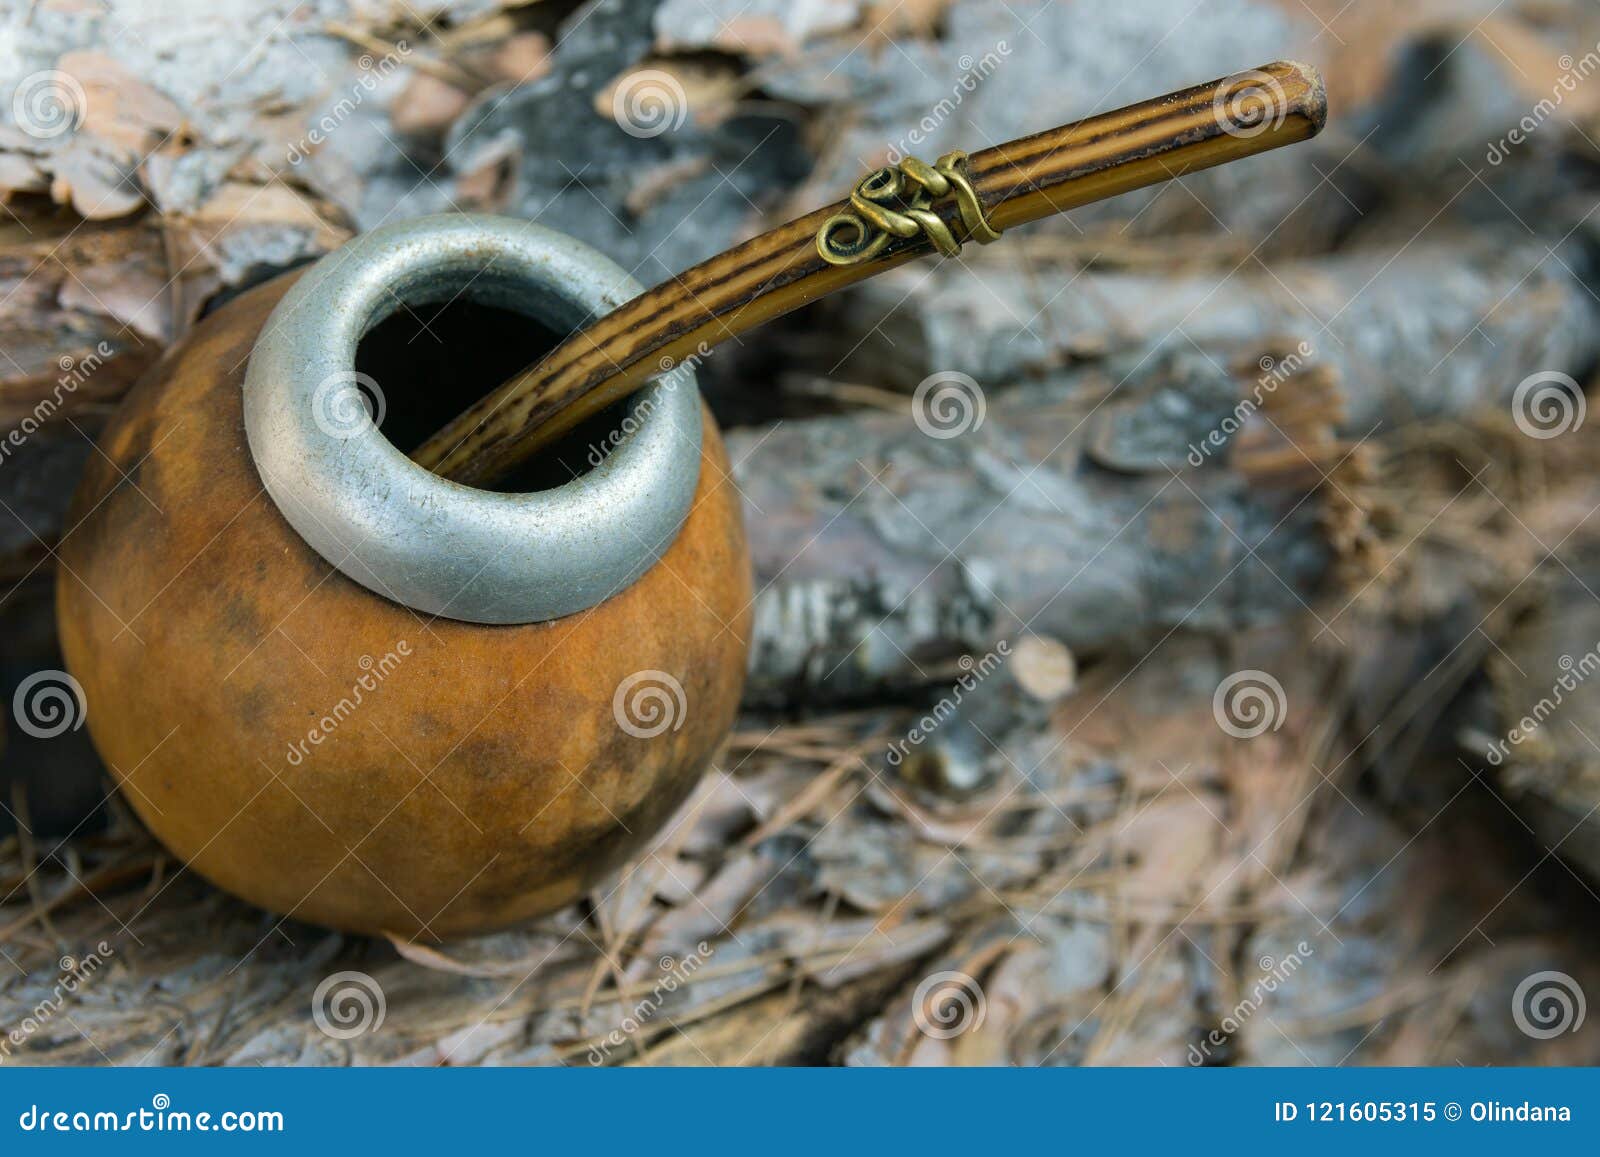 hand crafted artisanal yerba mate tea leather calabash gourd with straw on wood logs in forest. travel wanderlust concept. earthy